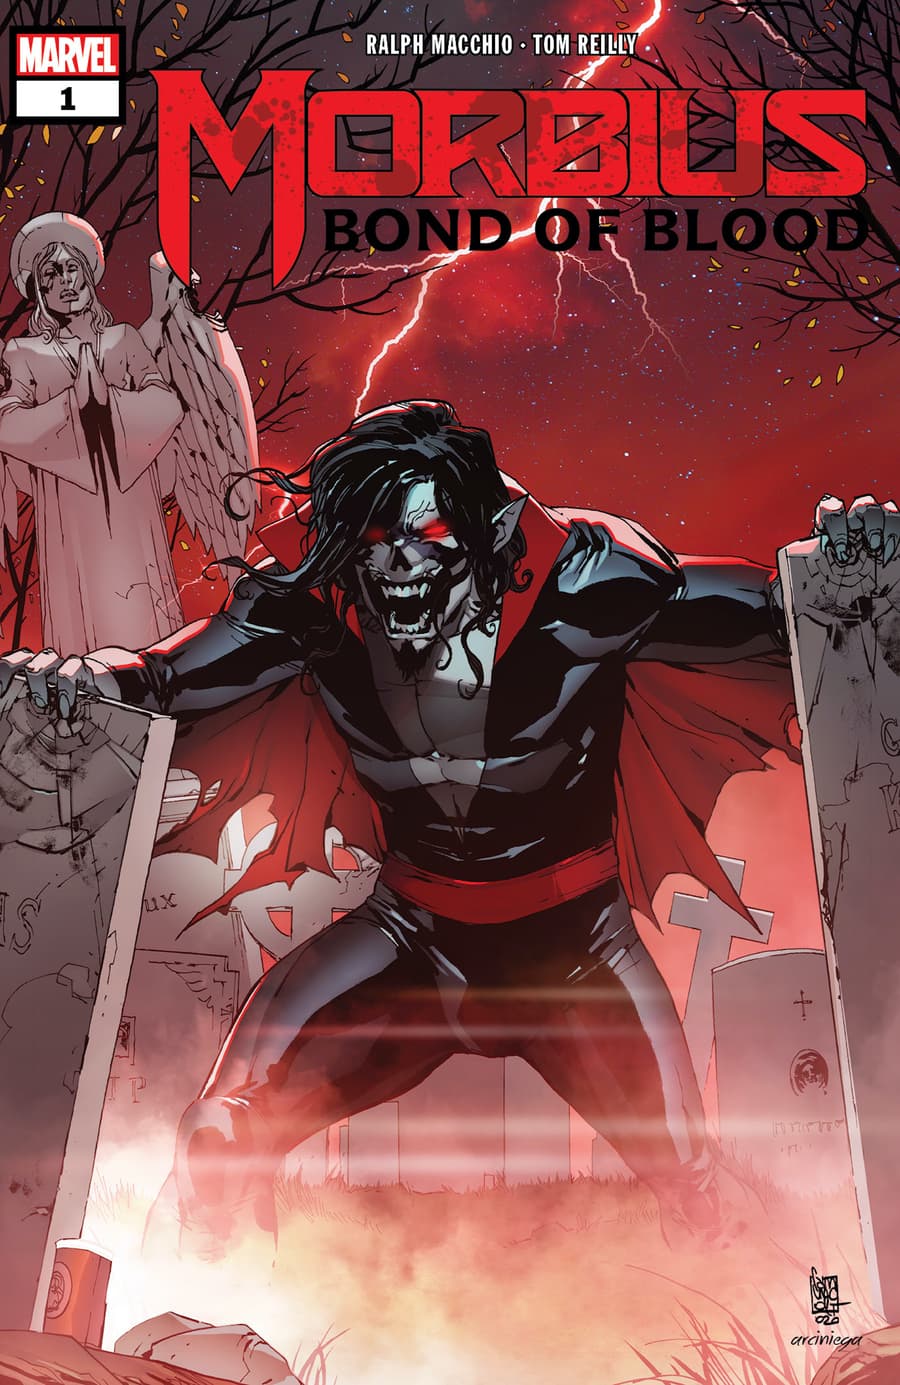 MORBIUS: BOND OF BLOOD #1 cover by Giuseppe Camuncoli